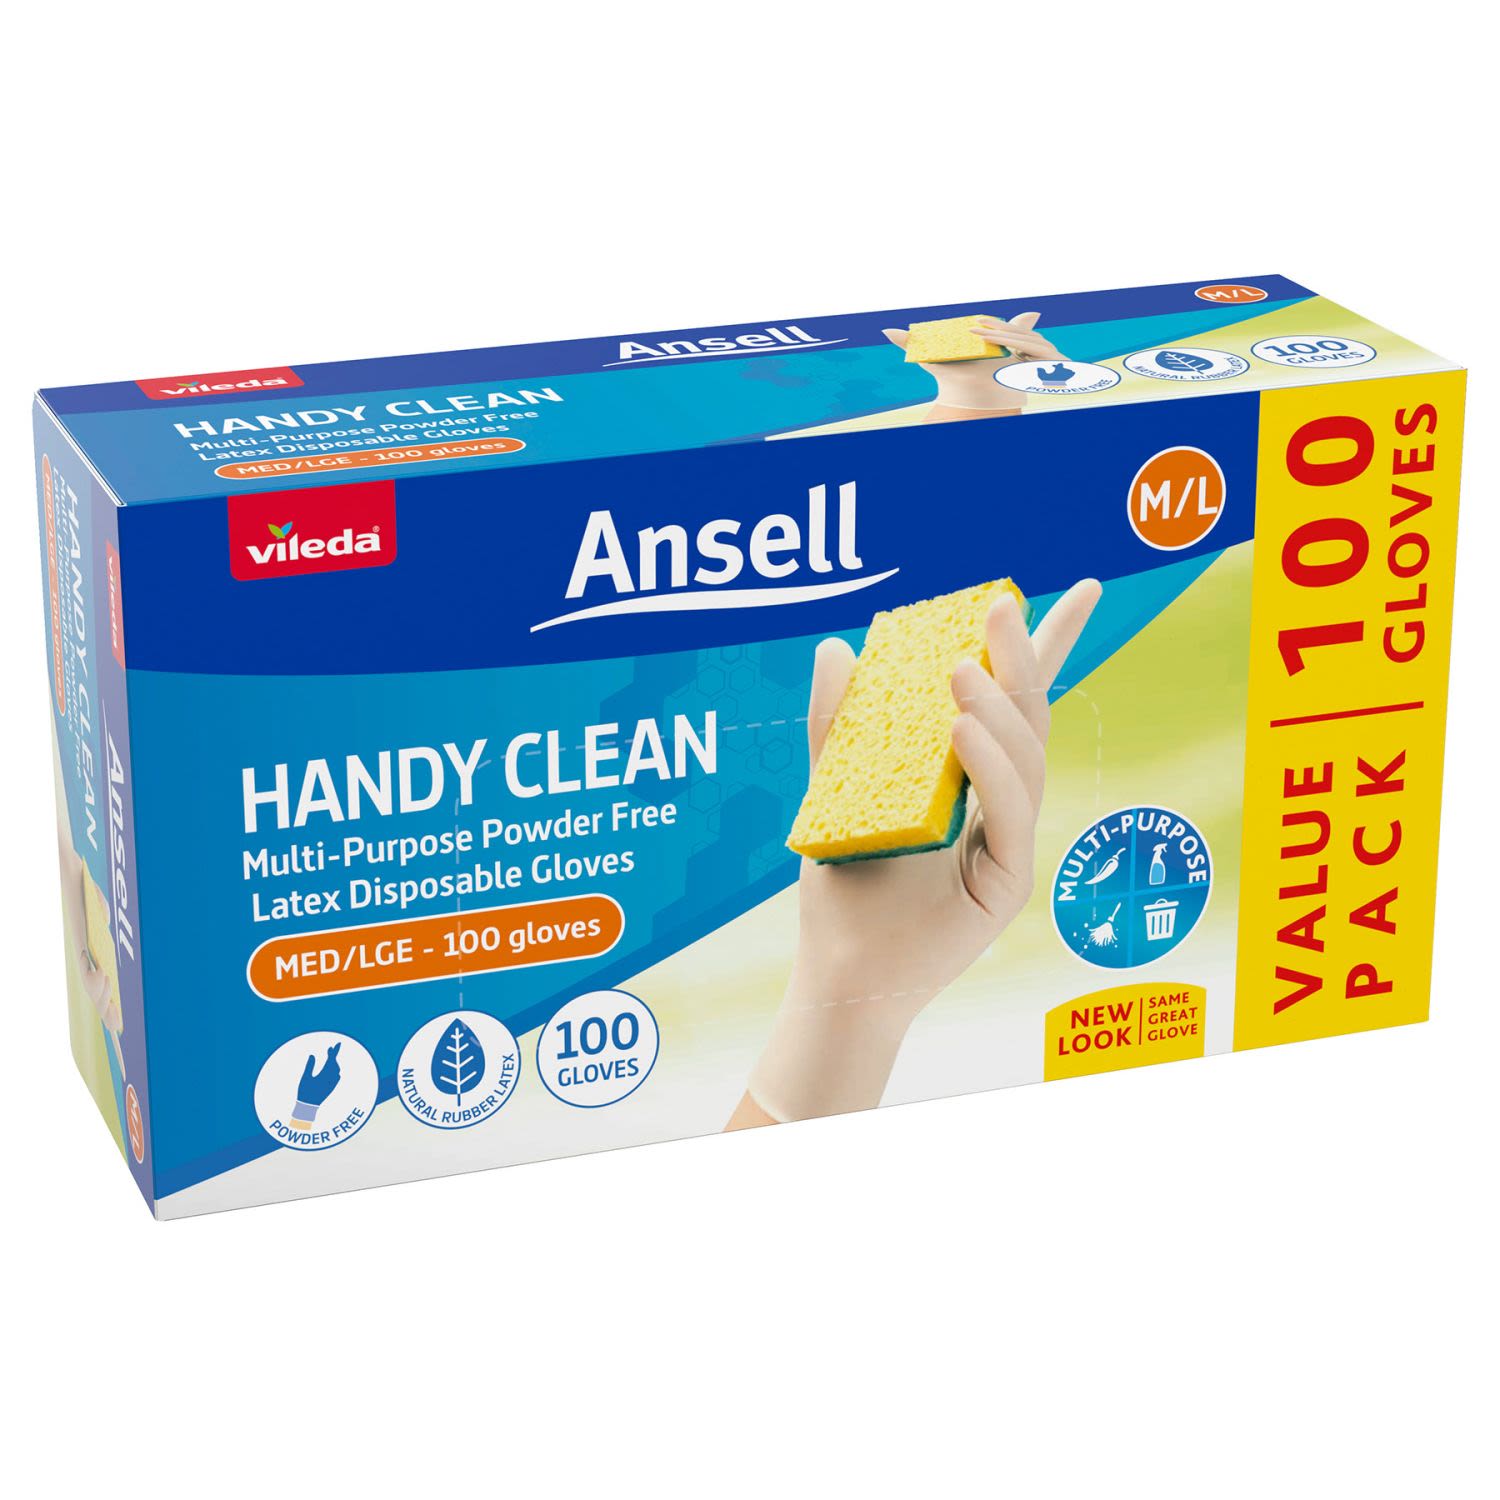 Ansell Handy Clean Gloves Disposable Multi-Purpose, 100 Each